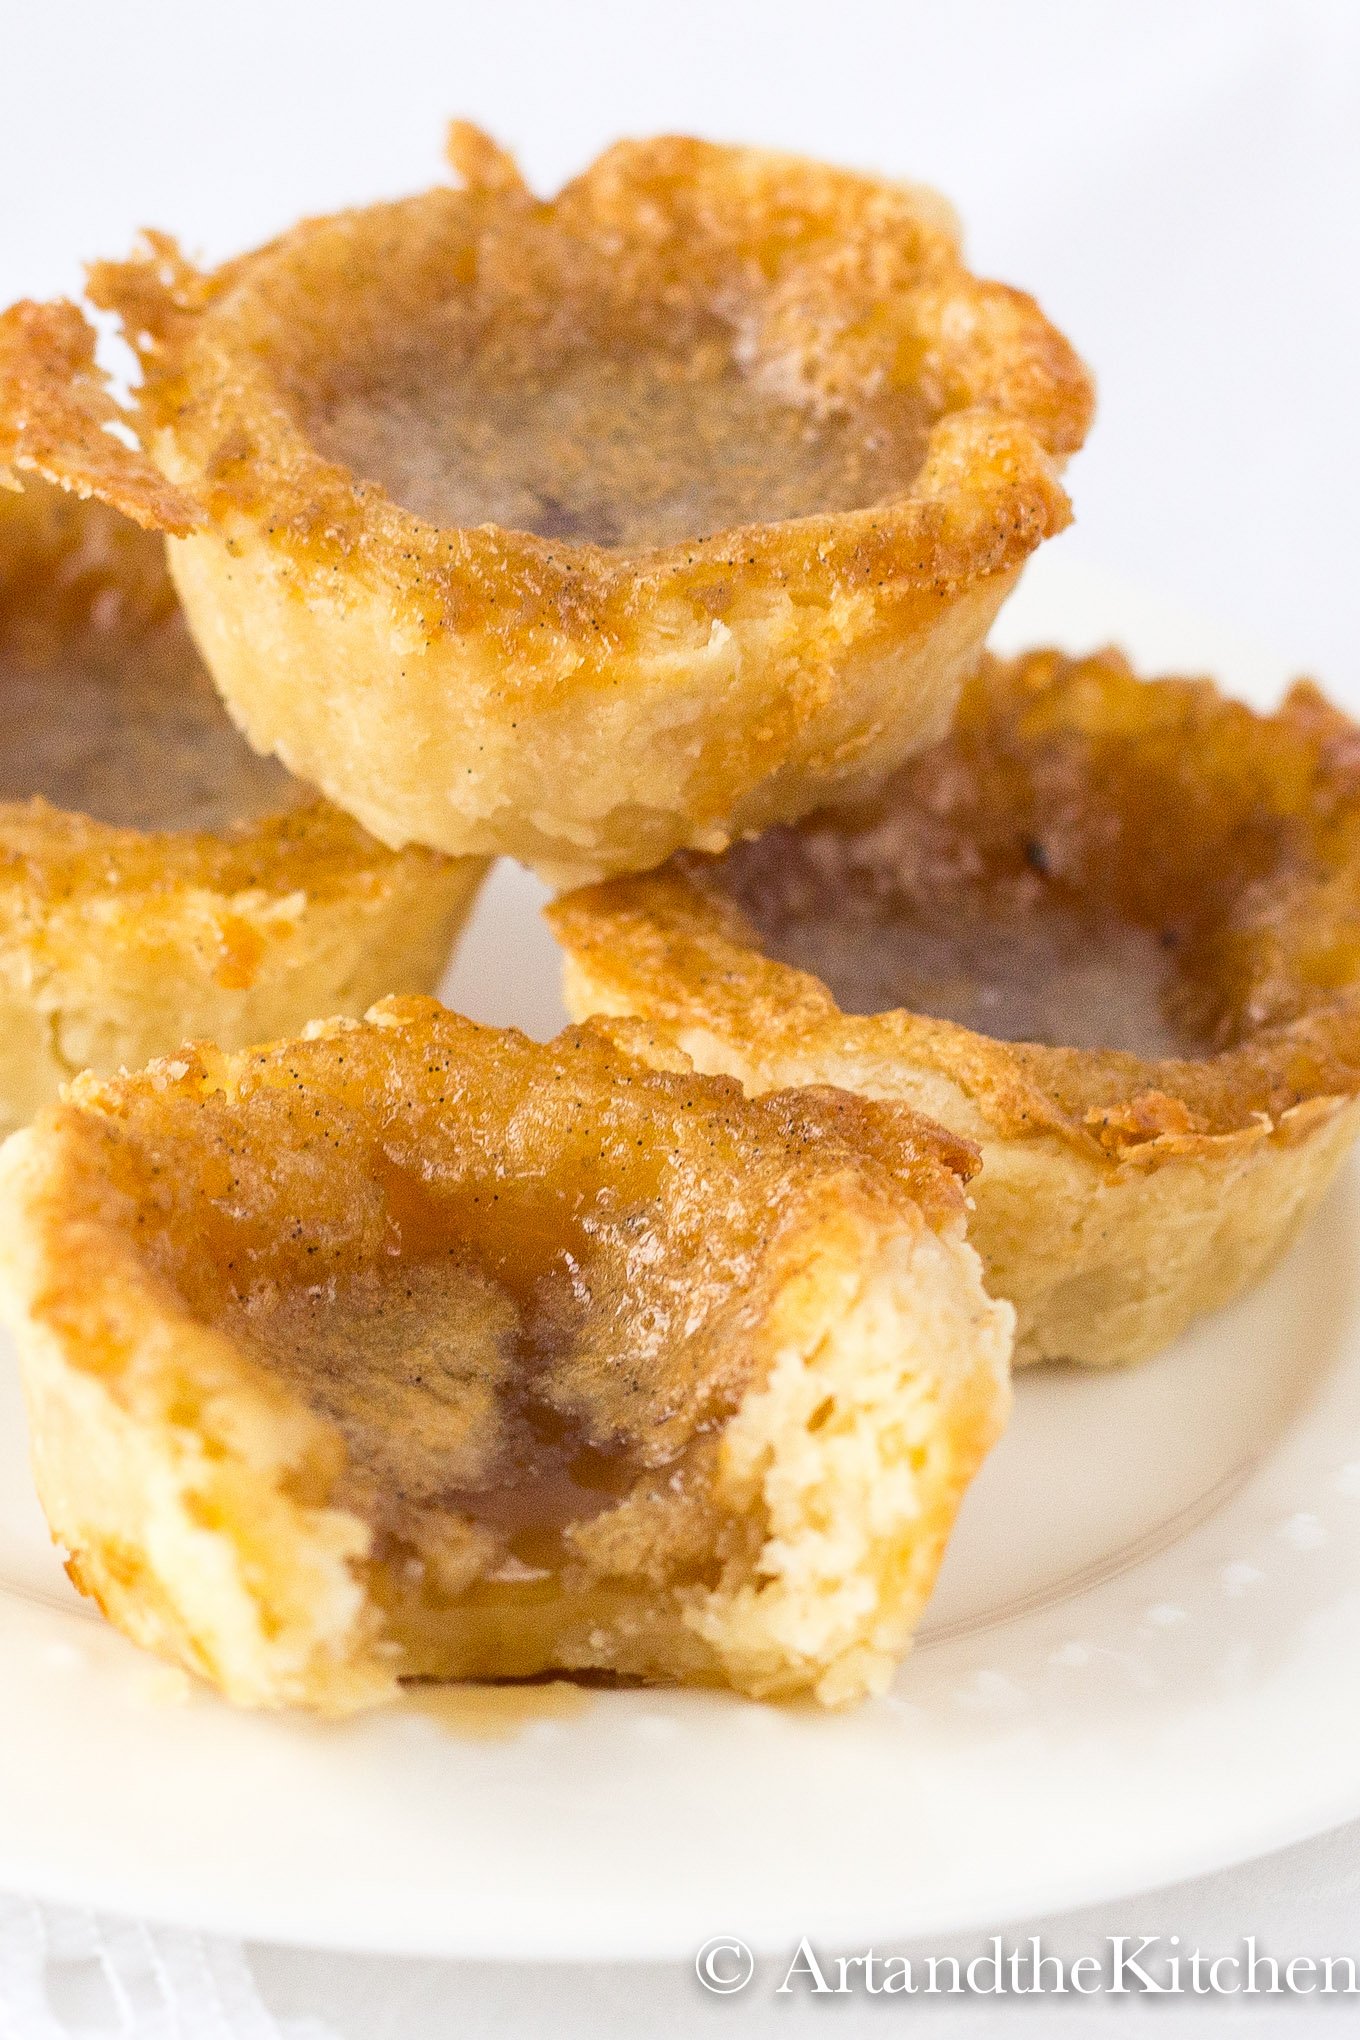 Stack of 4 homemade butter tarts on a white plate.